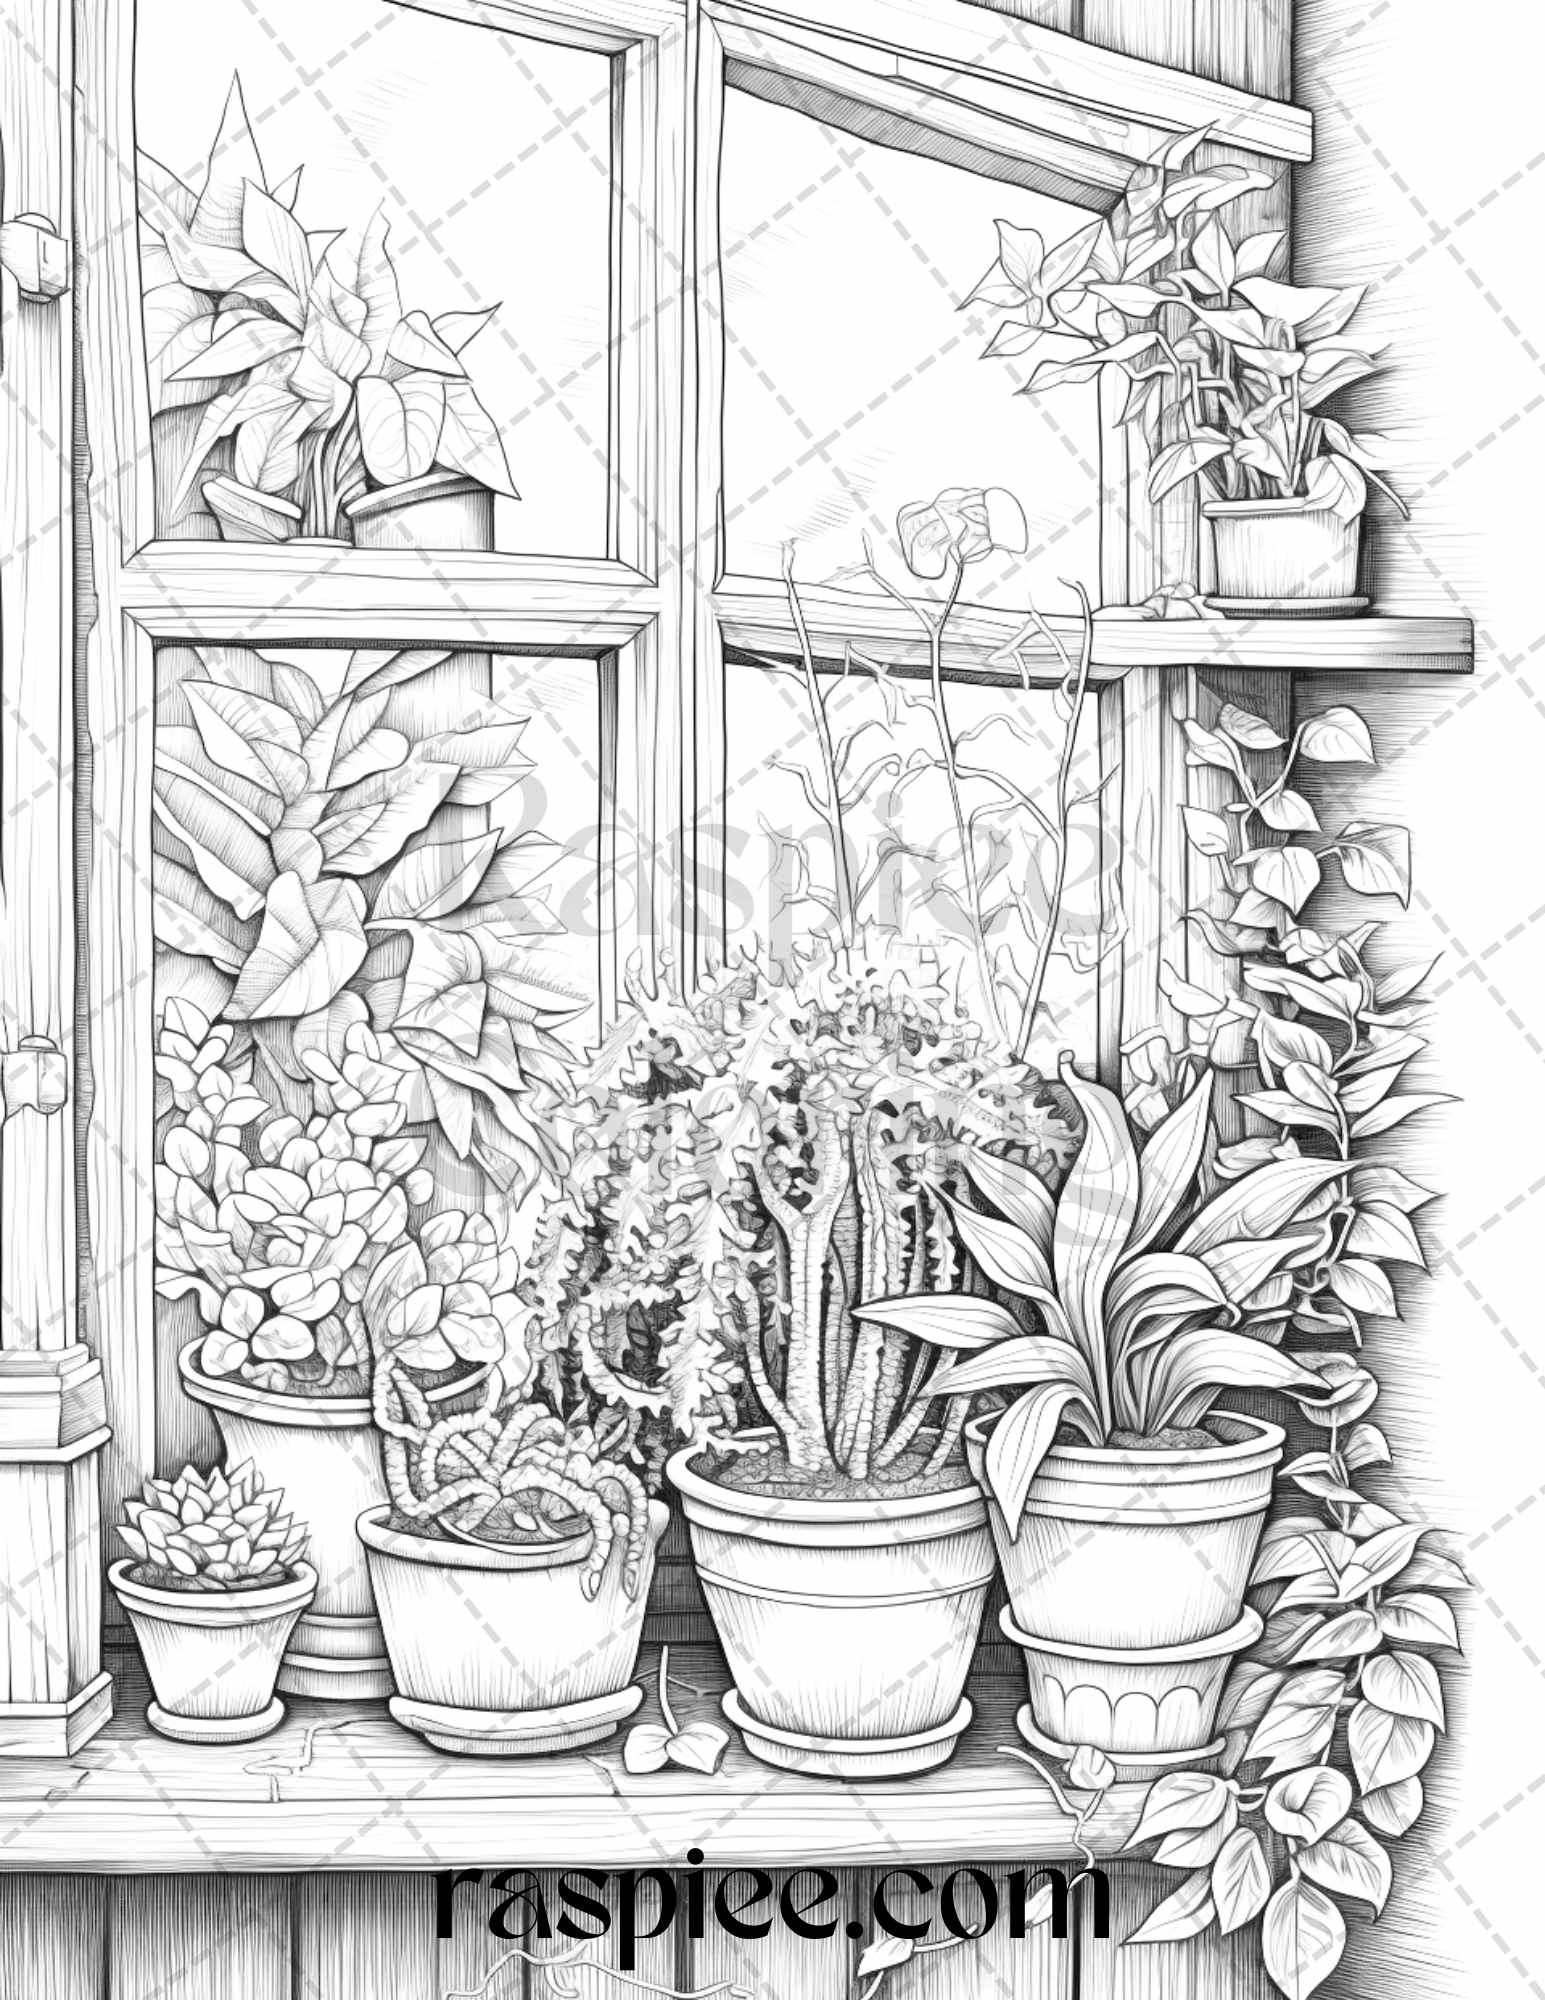 40 Window Plants Grayscale Coloring Pages Printable for Adults, PDF File Instant Download - raspiee